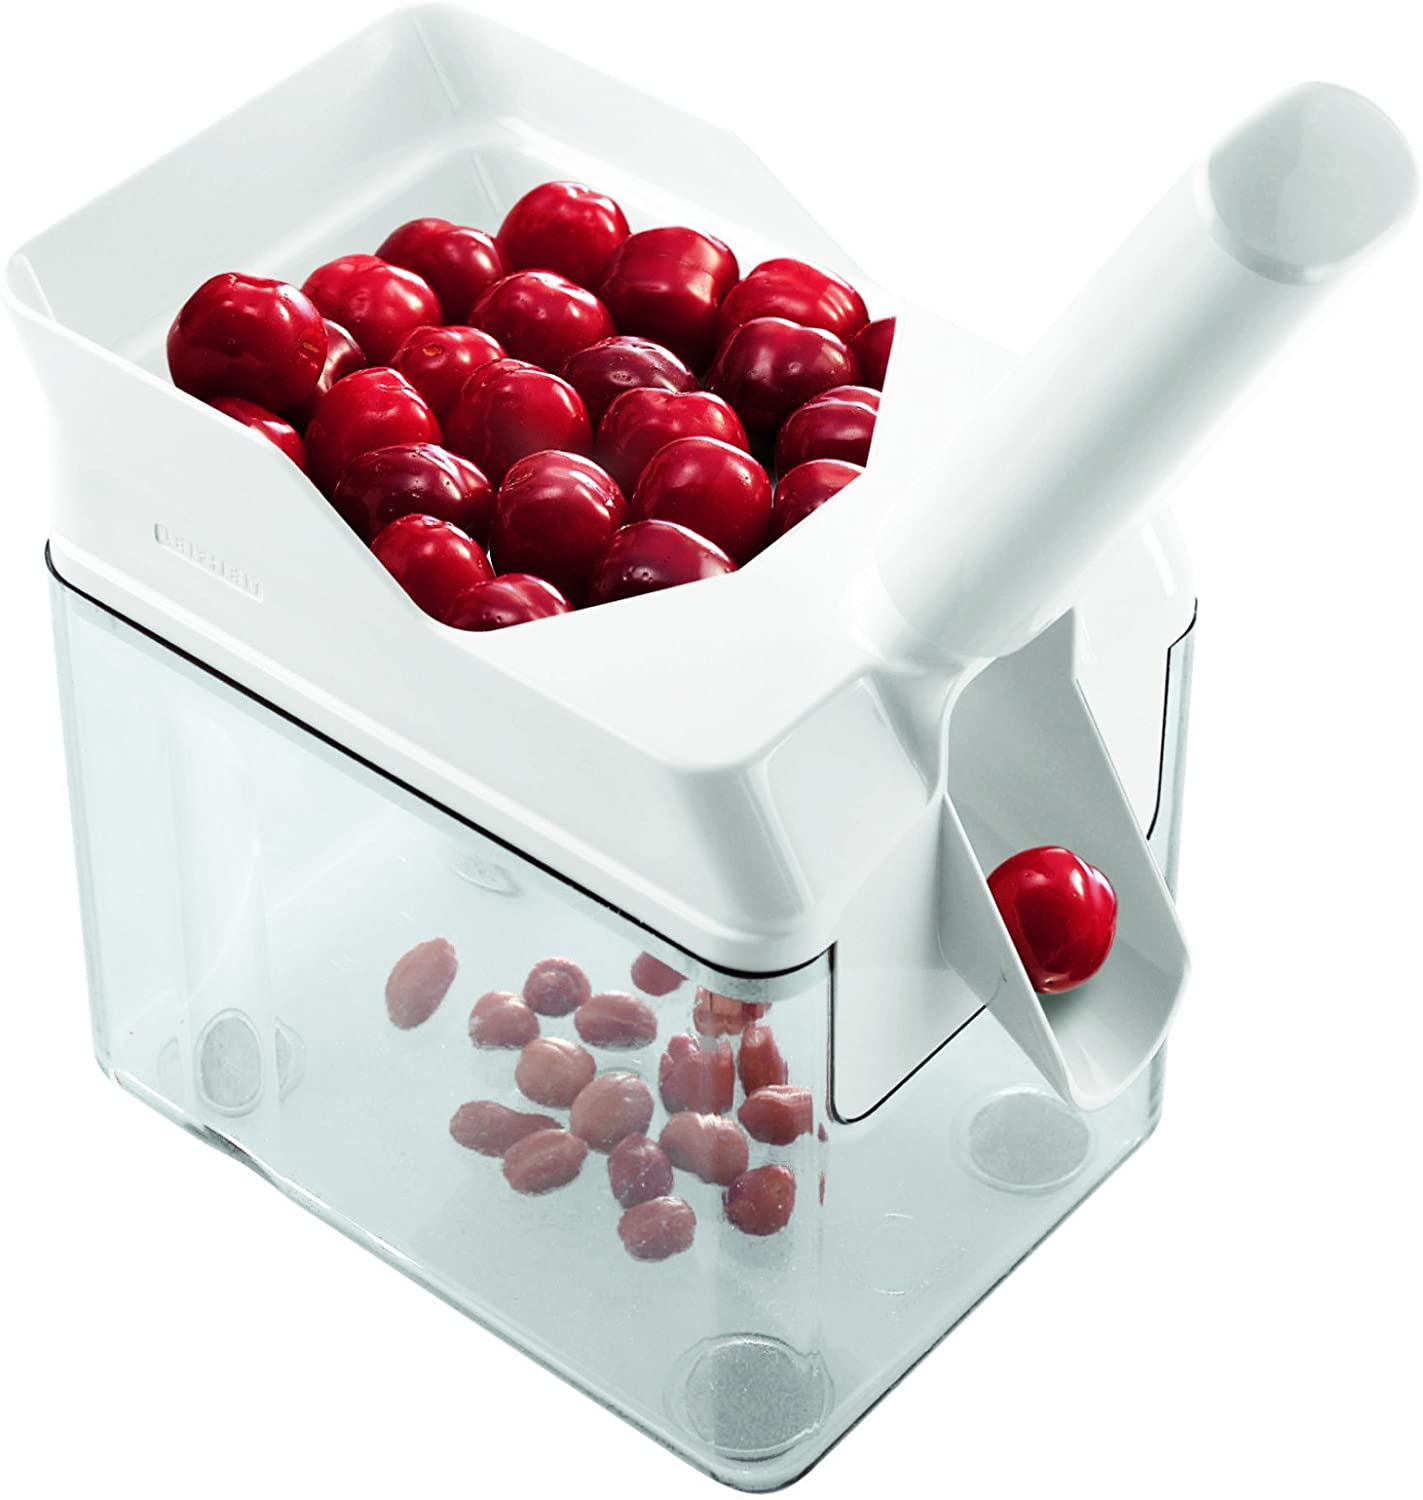 Leifheit Stone Catcher Container Cherry Pitter